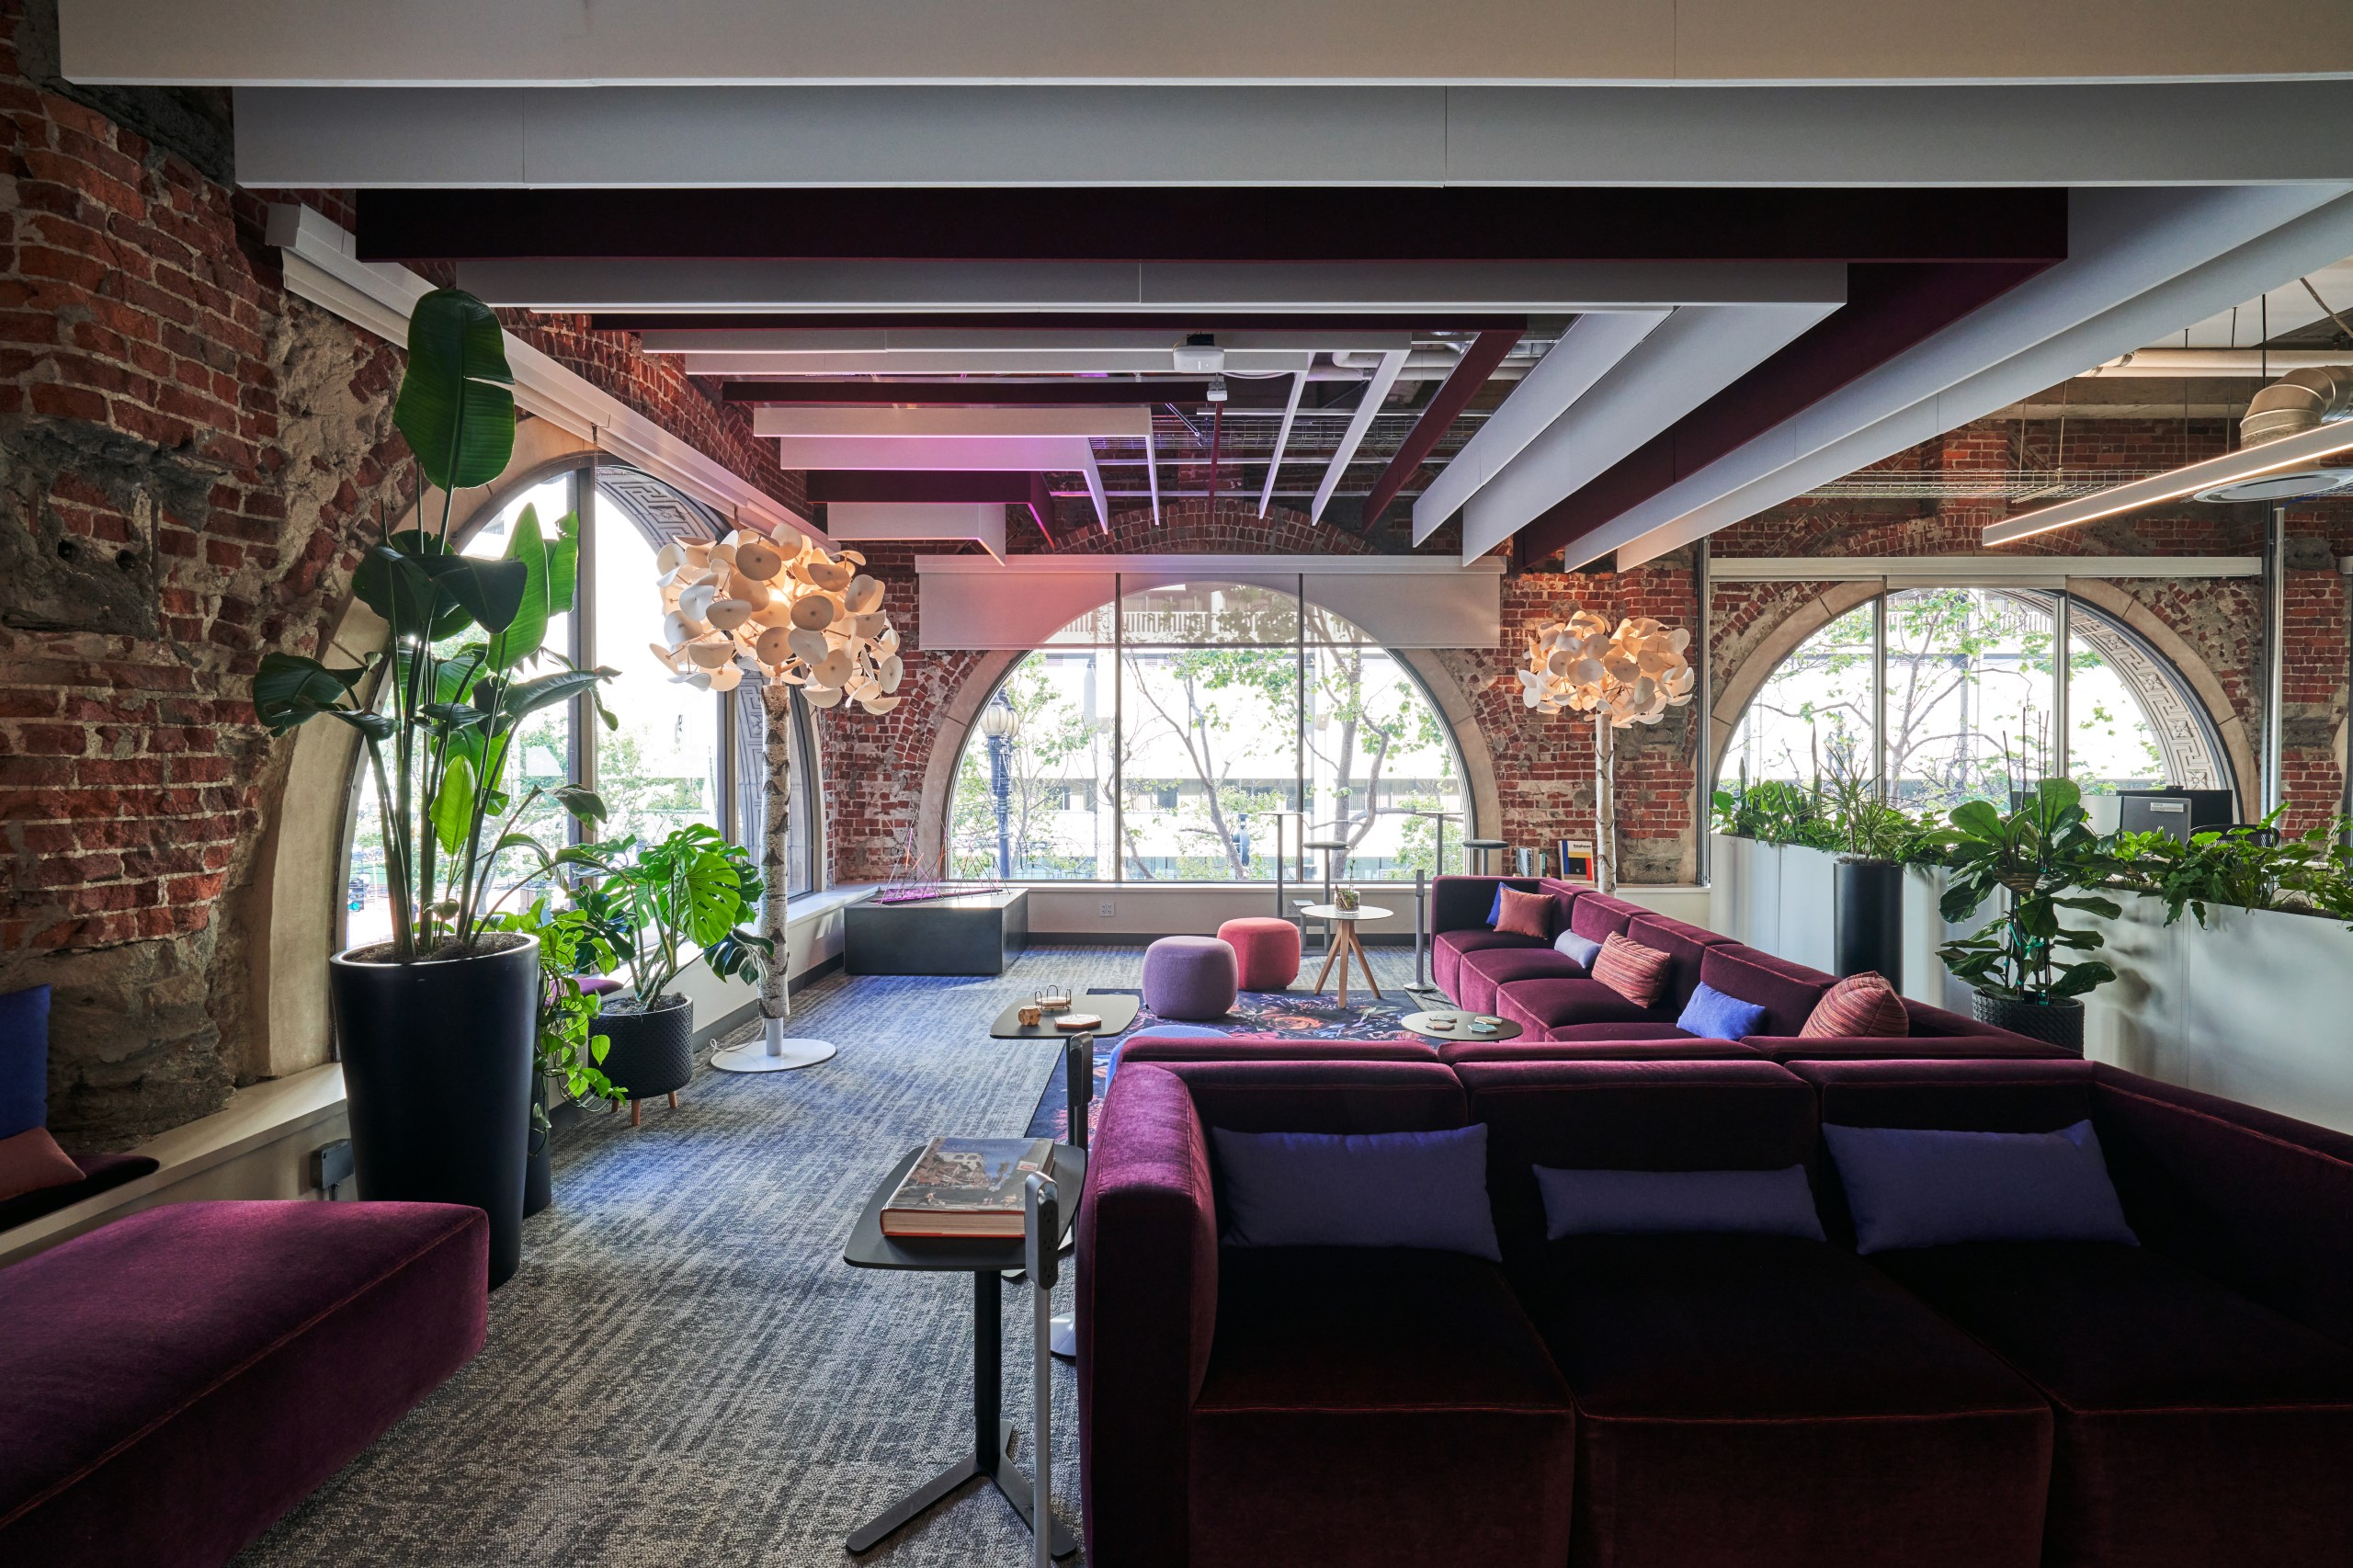 Hybrid work space with large arched windows, couches and houseplants.